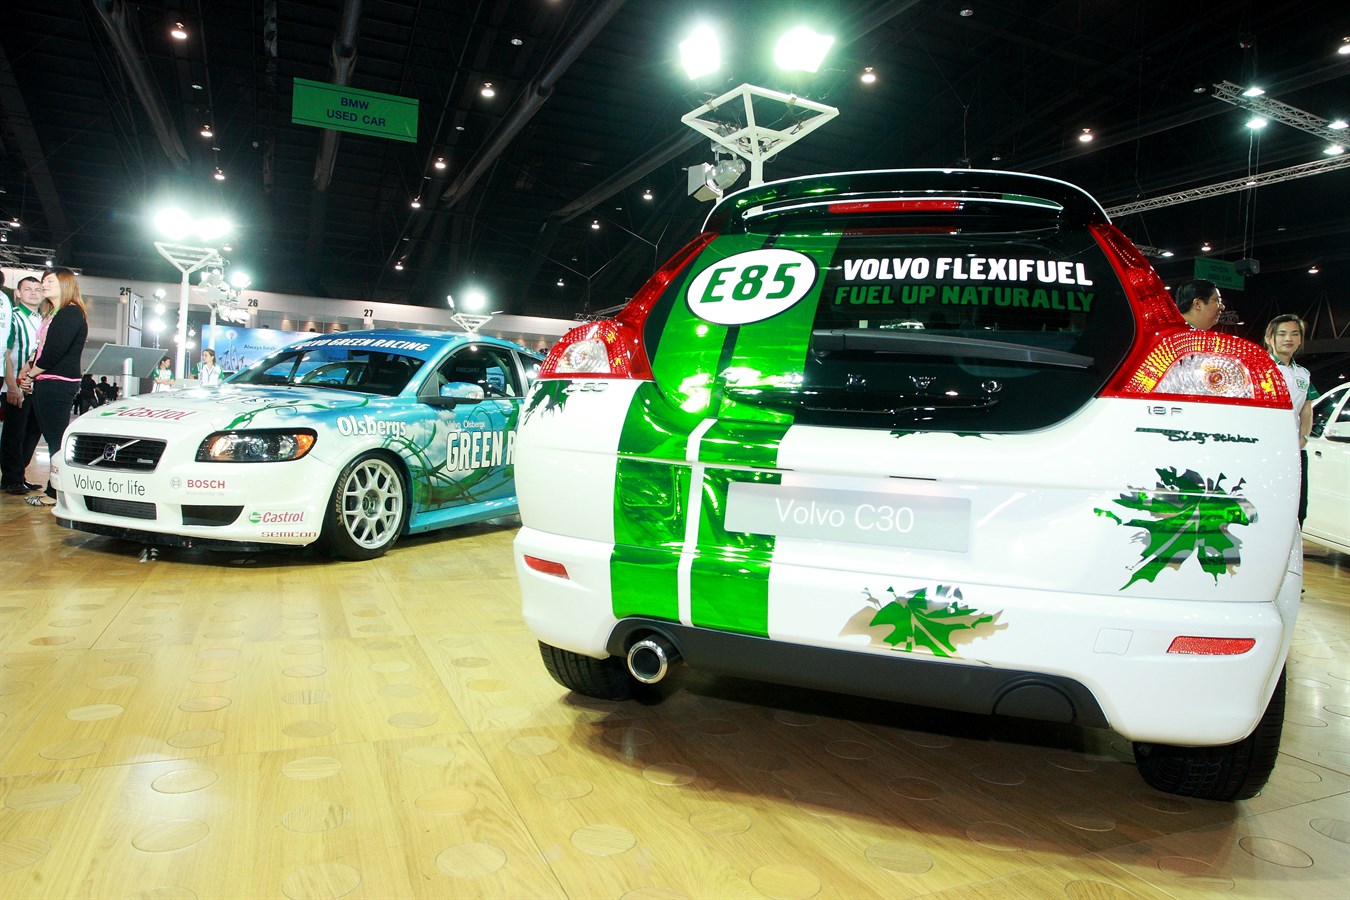 Volvo Flexifuel (E85) Volvo C30 1.8F and the STCC C30 Flexifuel at Motor Expo in Thailand